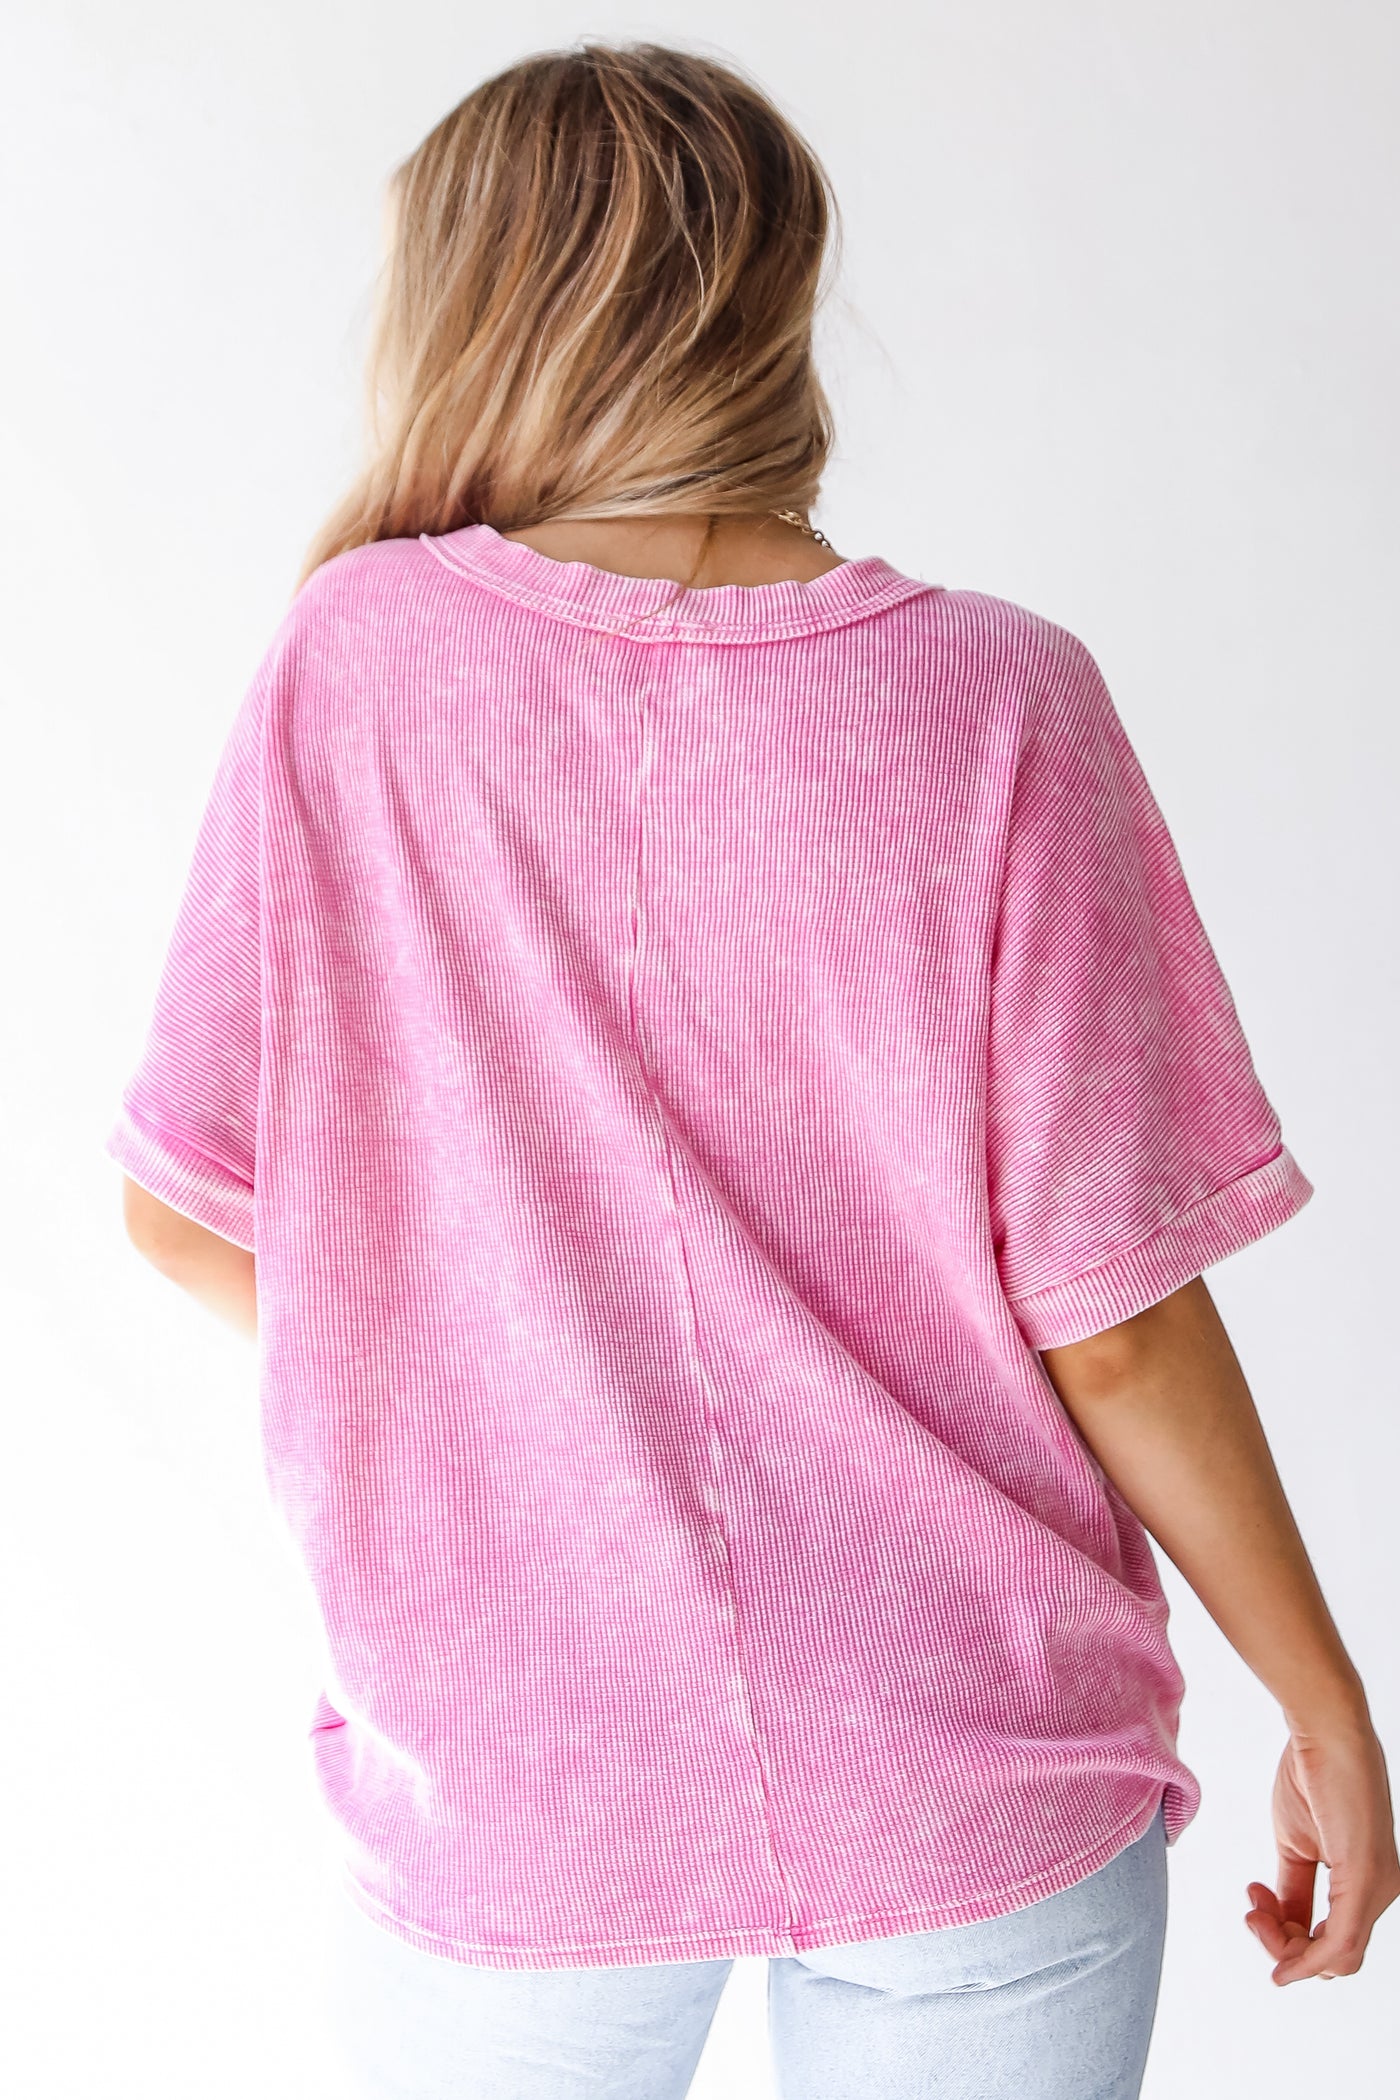 pink tee back view